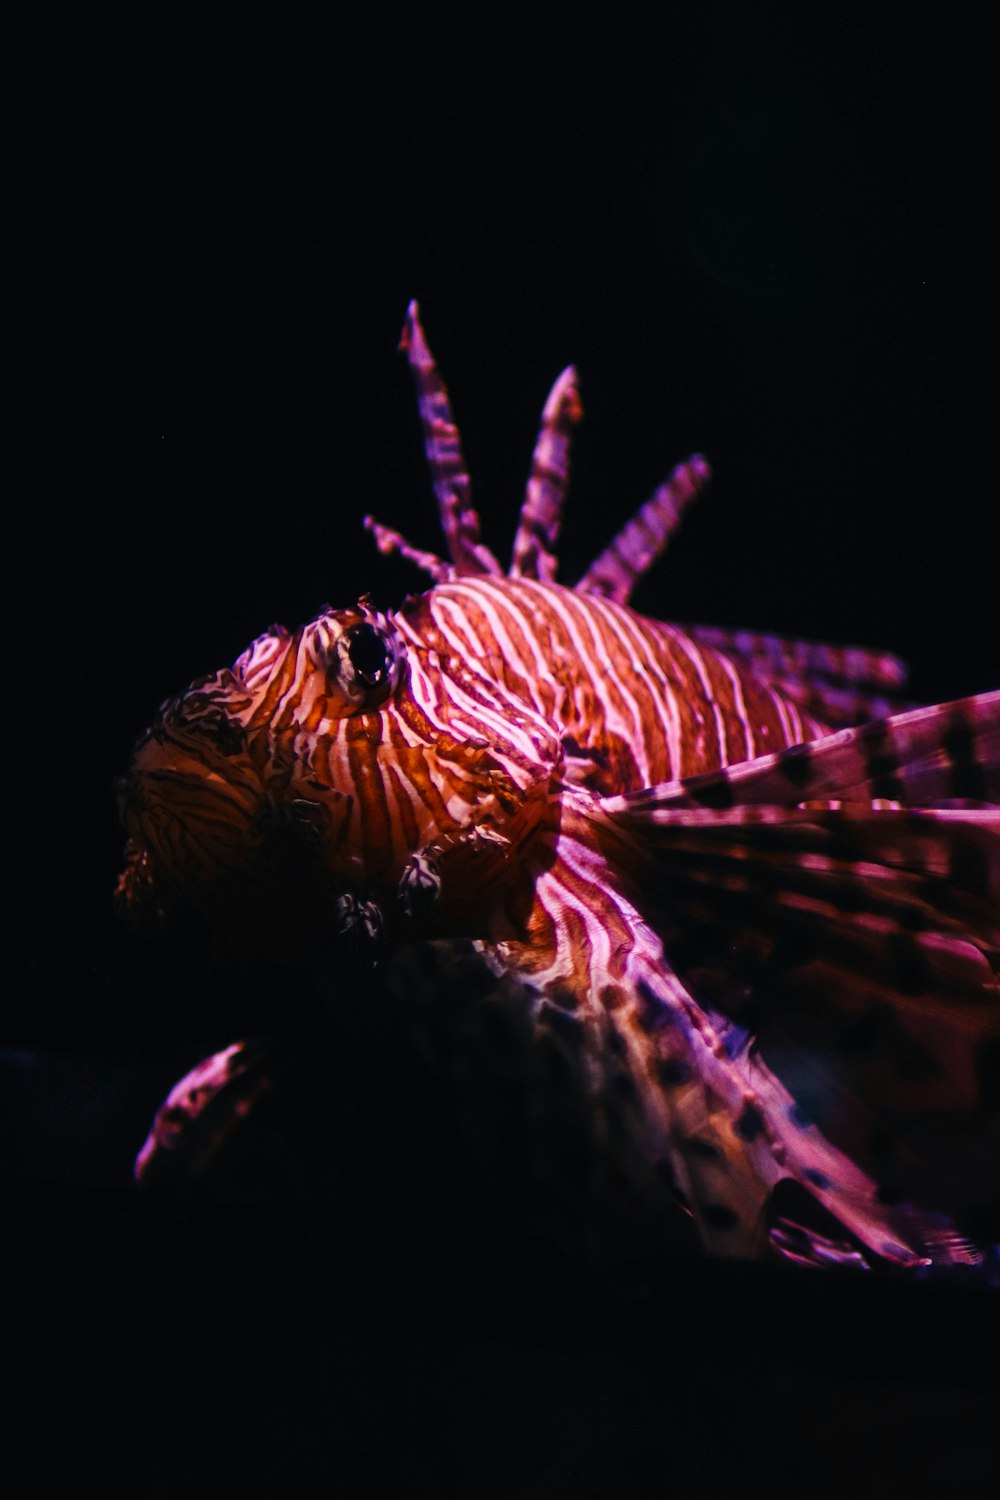 a close up of a lionfish in the dark